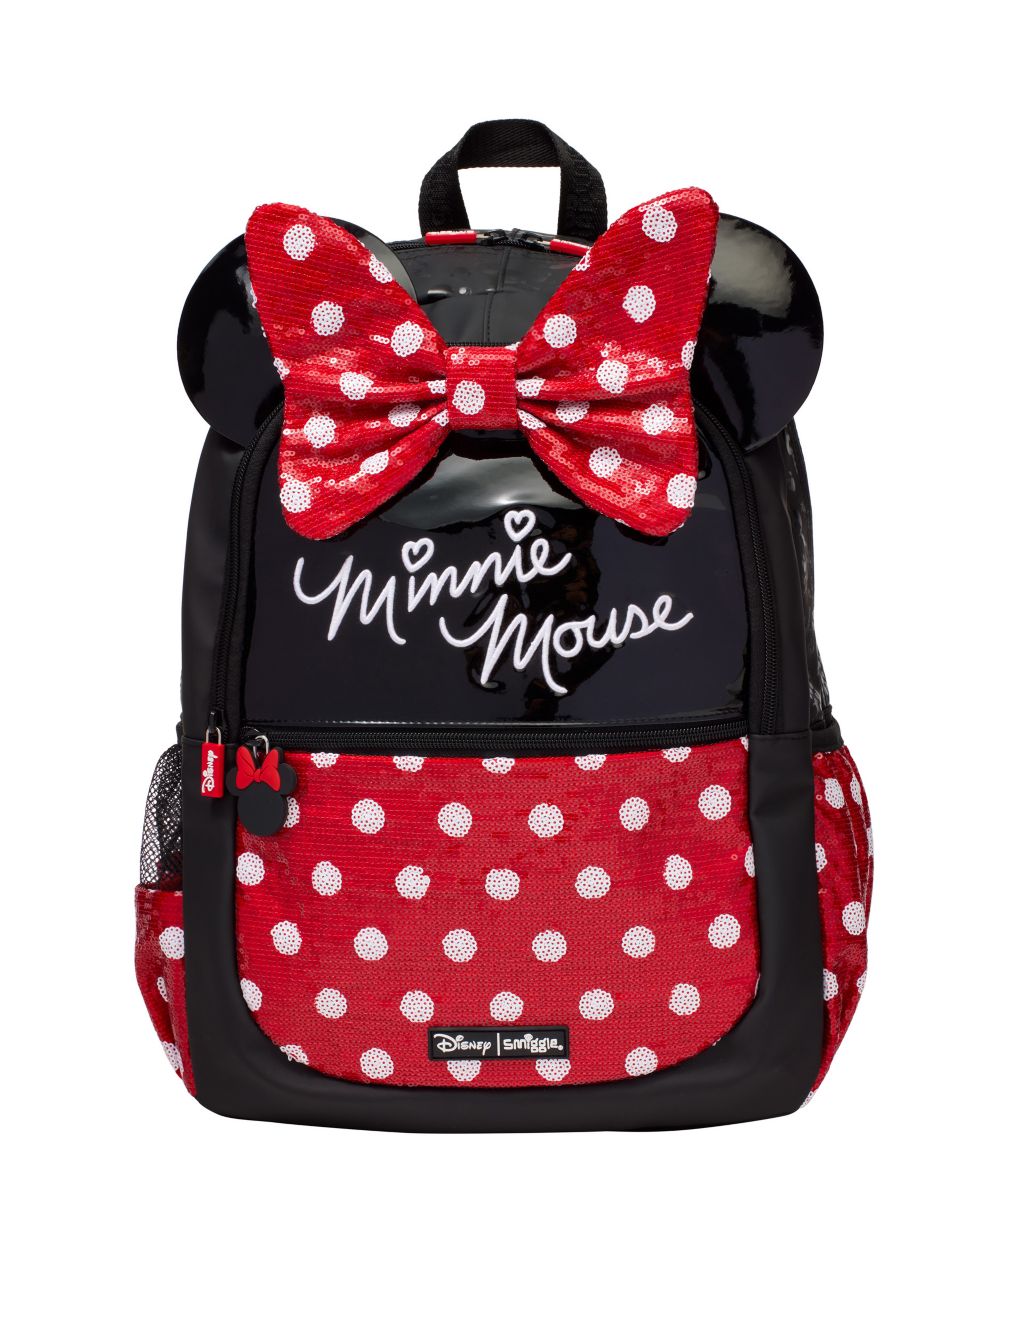 Kids' Minnie Mouse™ School Backpack image 1